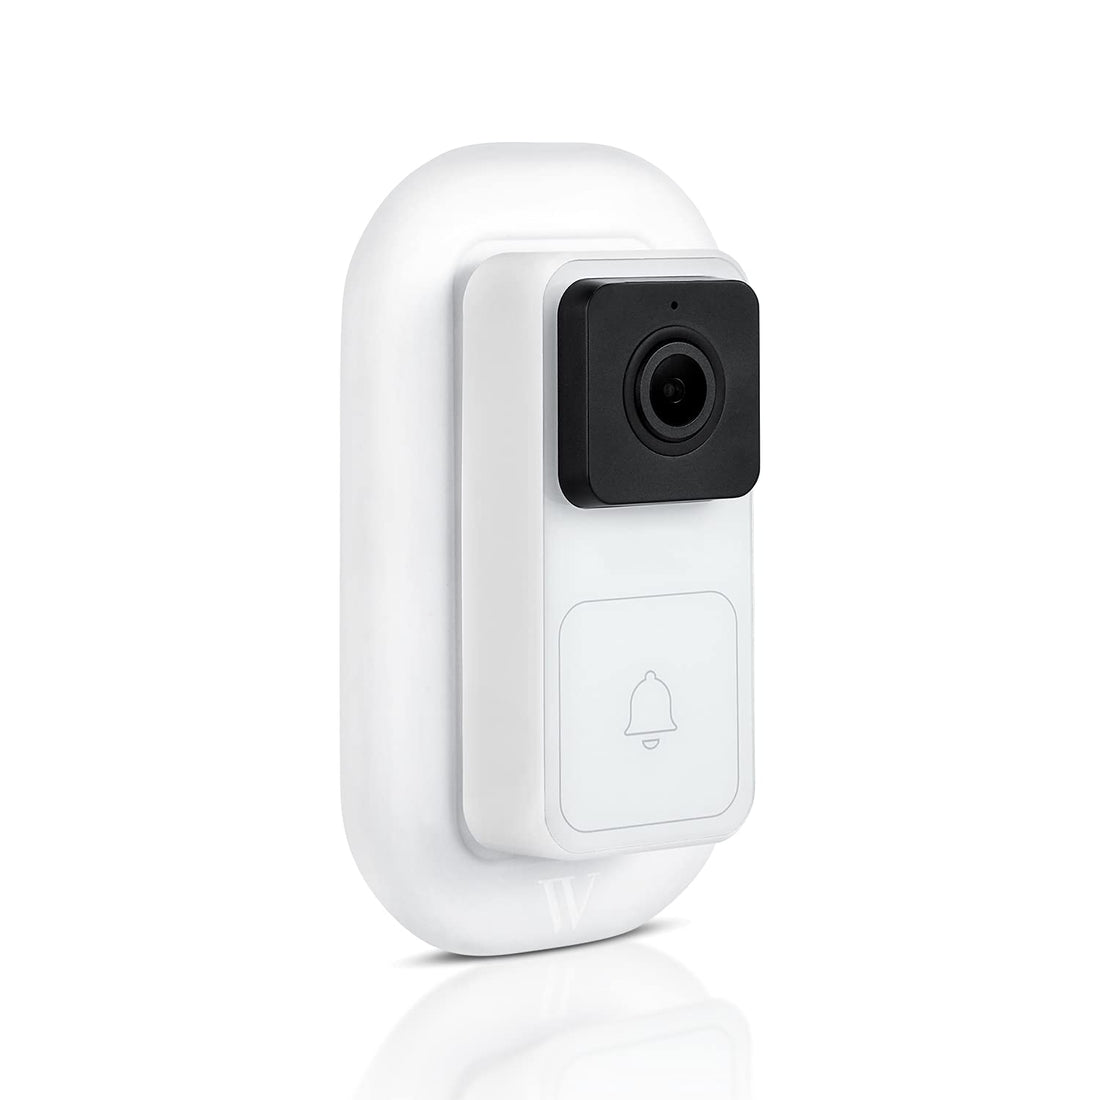 Wall Plate Compatible With Wyze Video Doorbell - Weather Resistant Wyze Video Doorbell Camera Mount - By Wasserstein